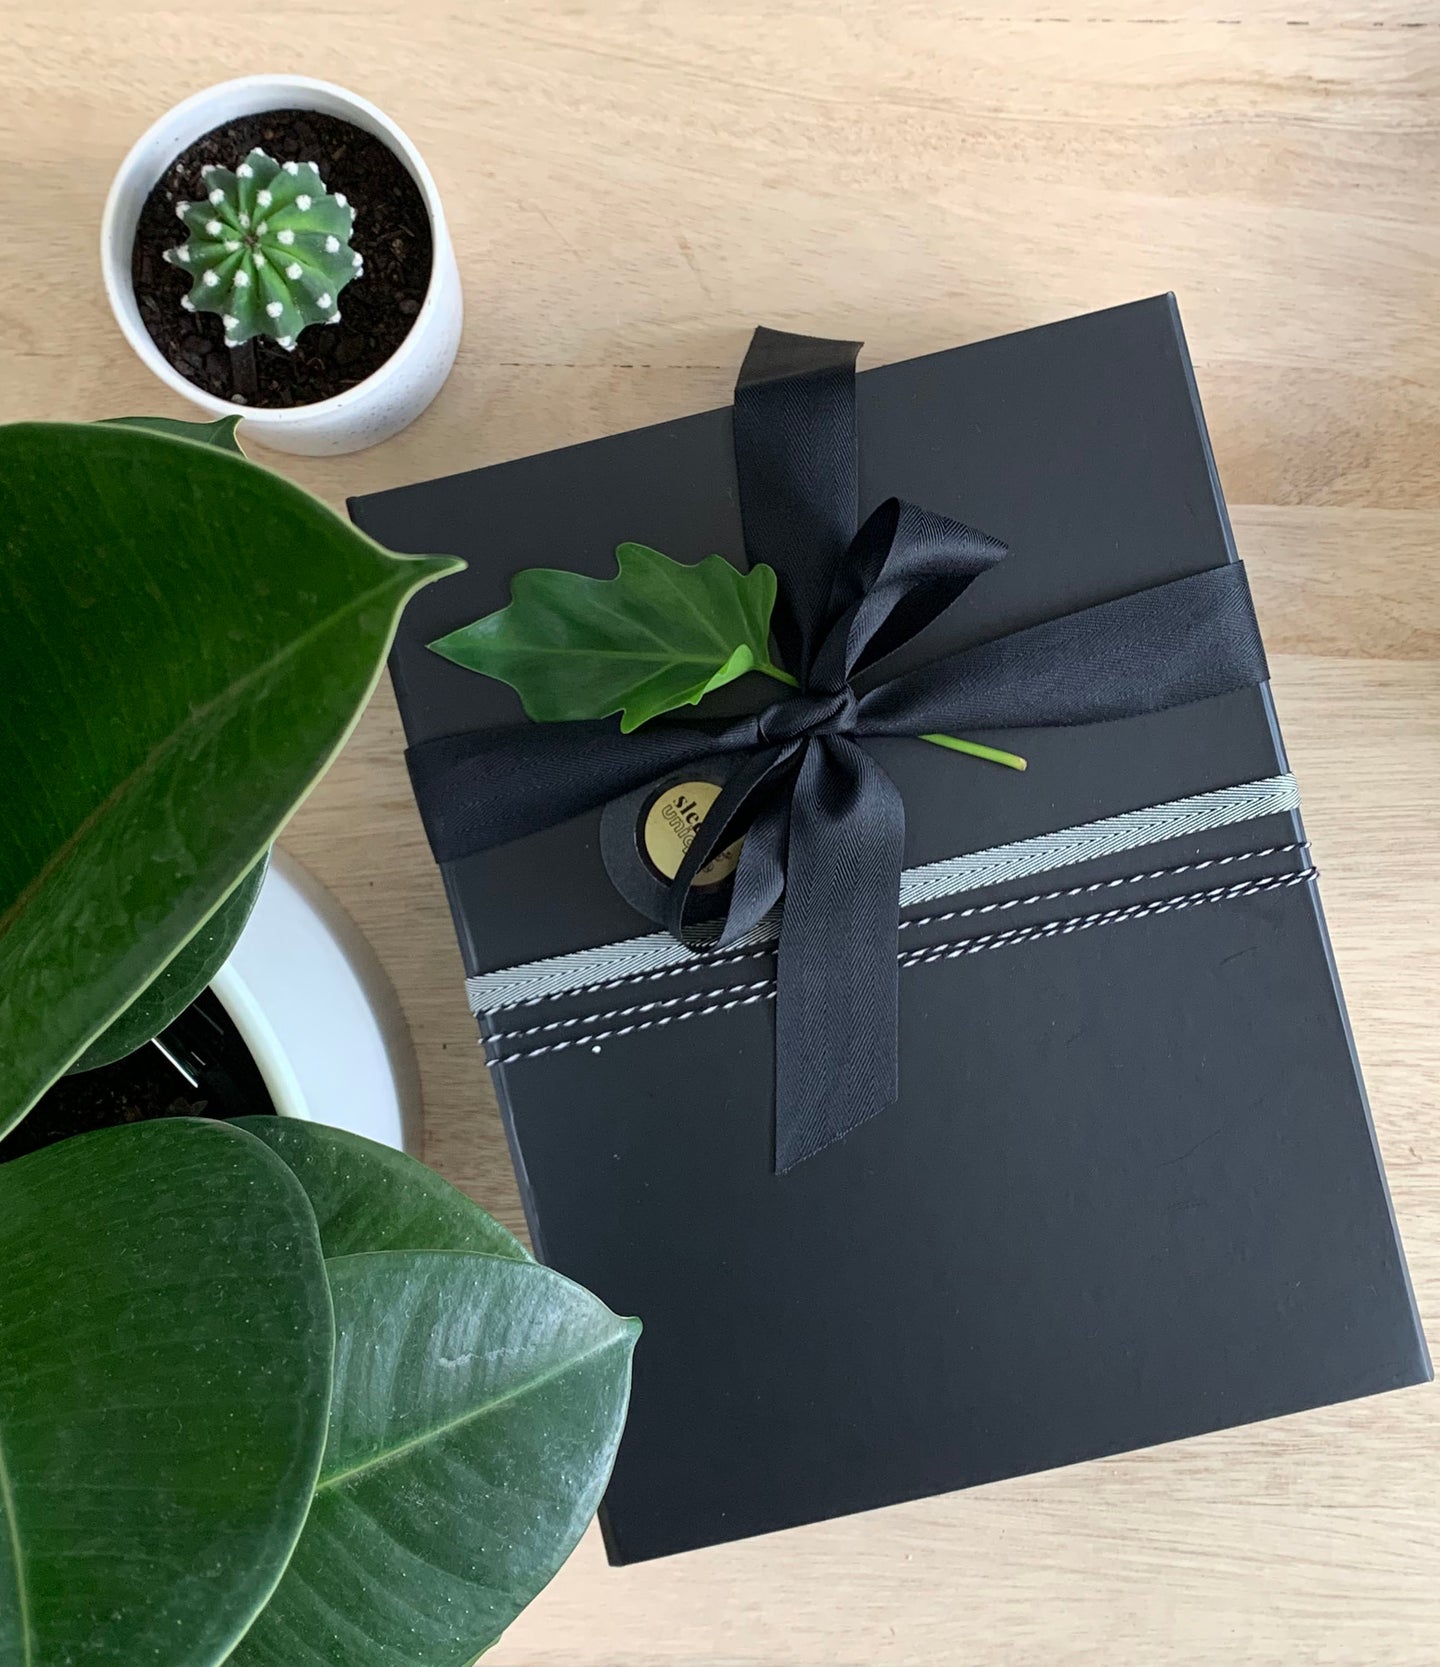 Best Adelaide Corporate Gift Boxes - Sleek and Unique Gifts